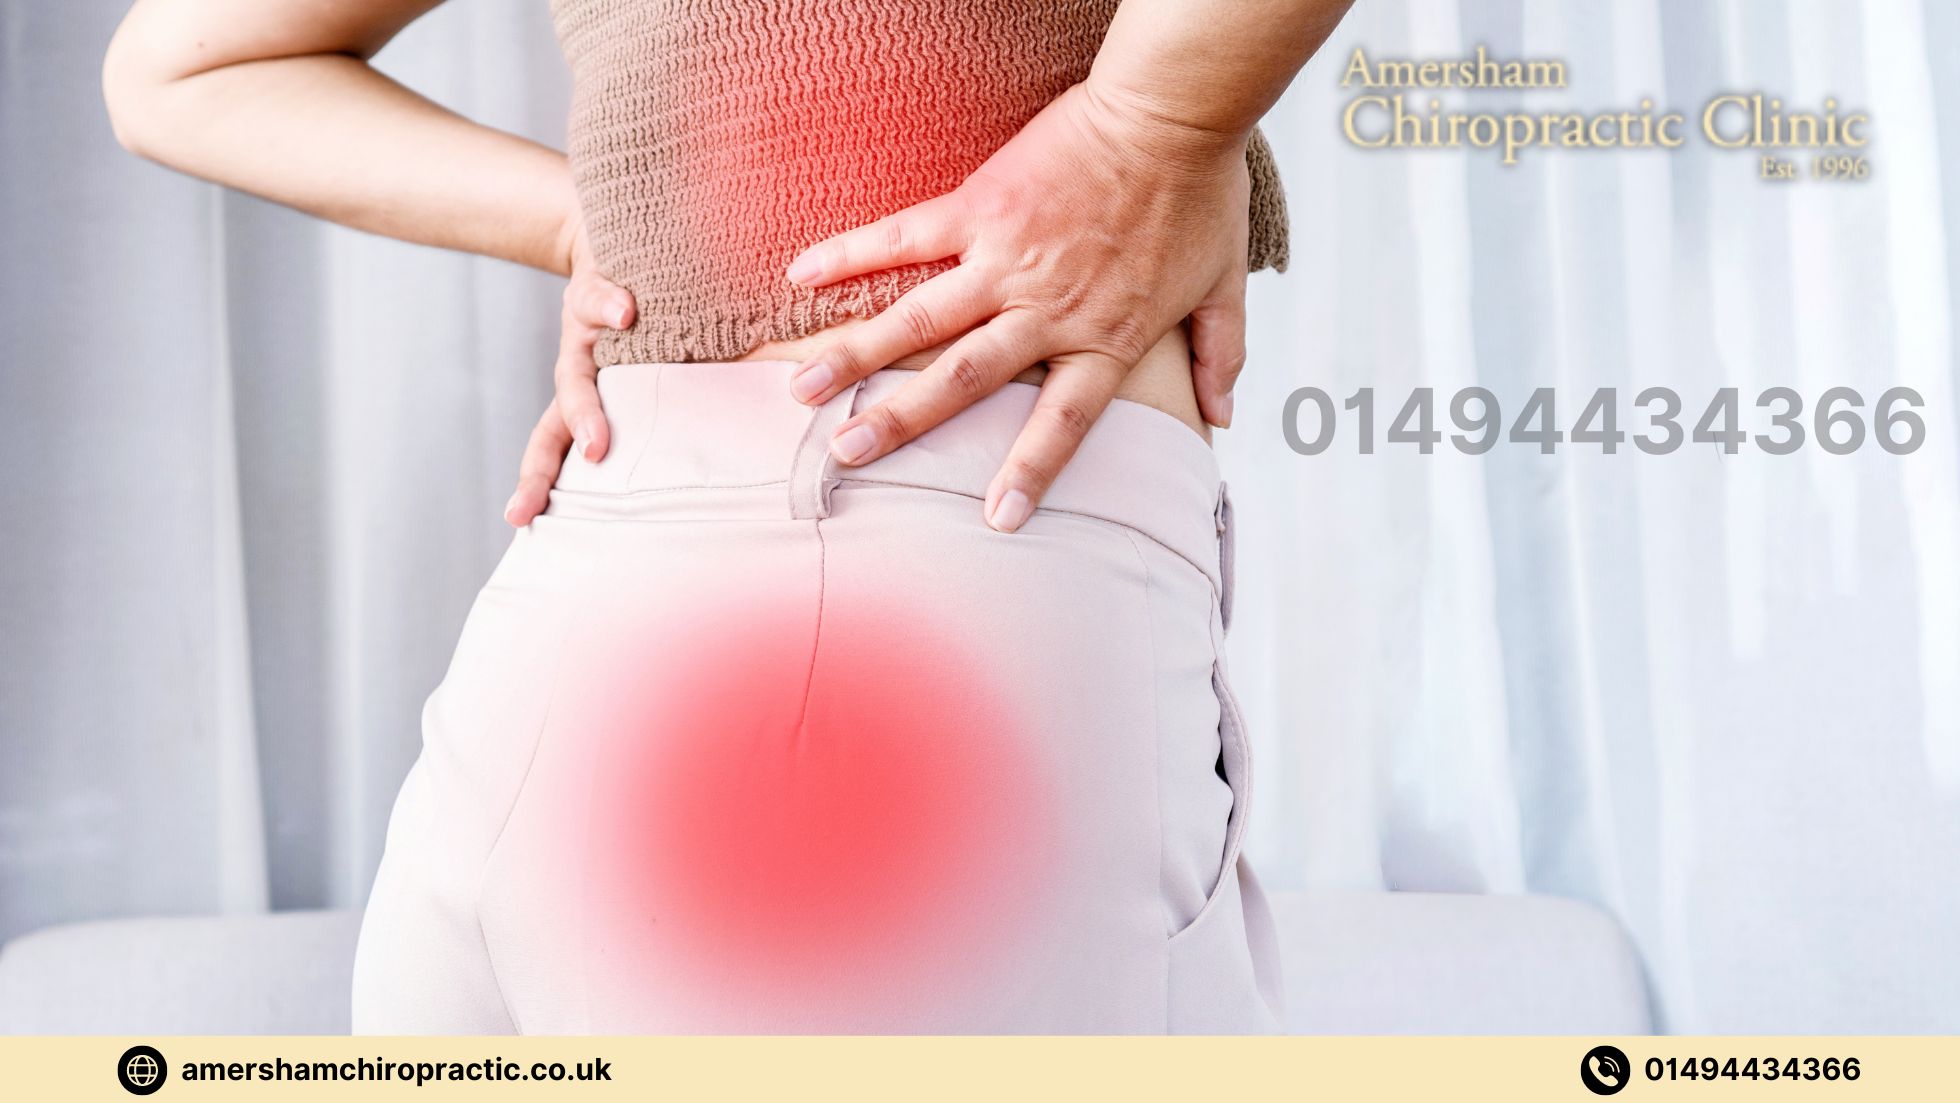 Can A Chiropractor Help With Hip Pain?